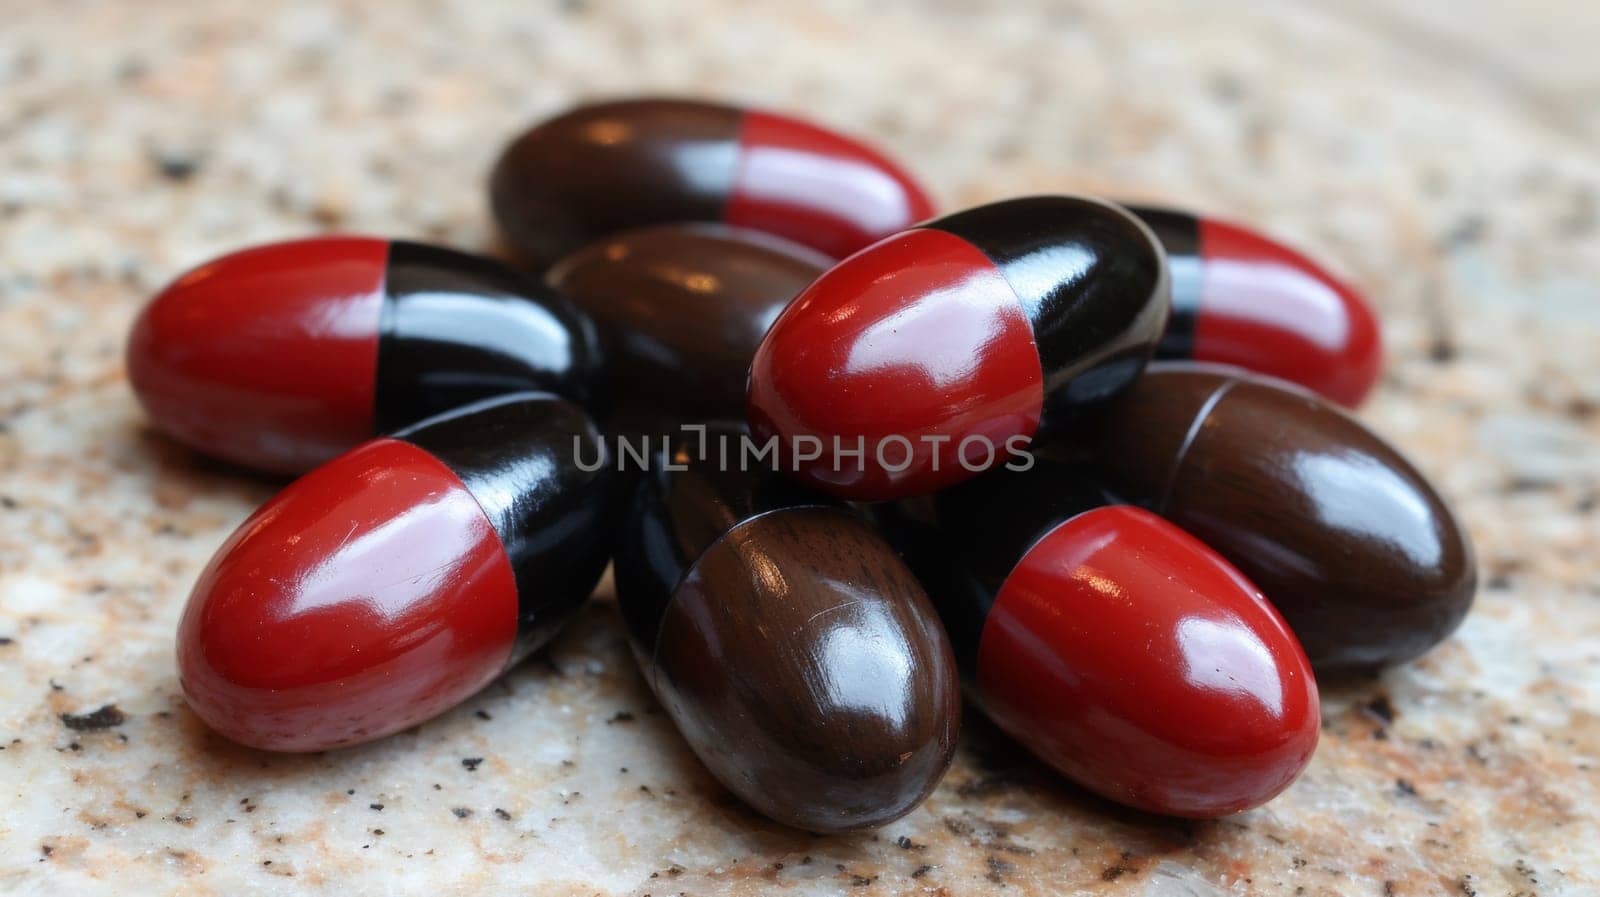 A bunch of pills are on a table with red and black caps